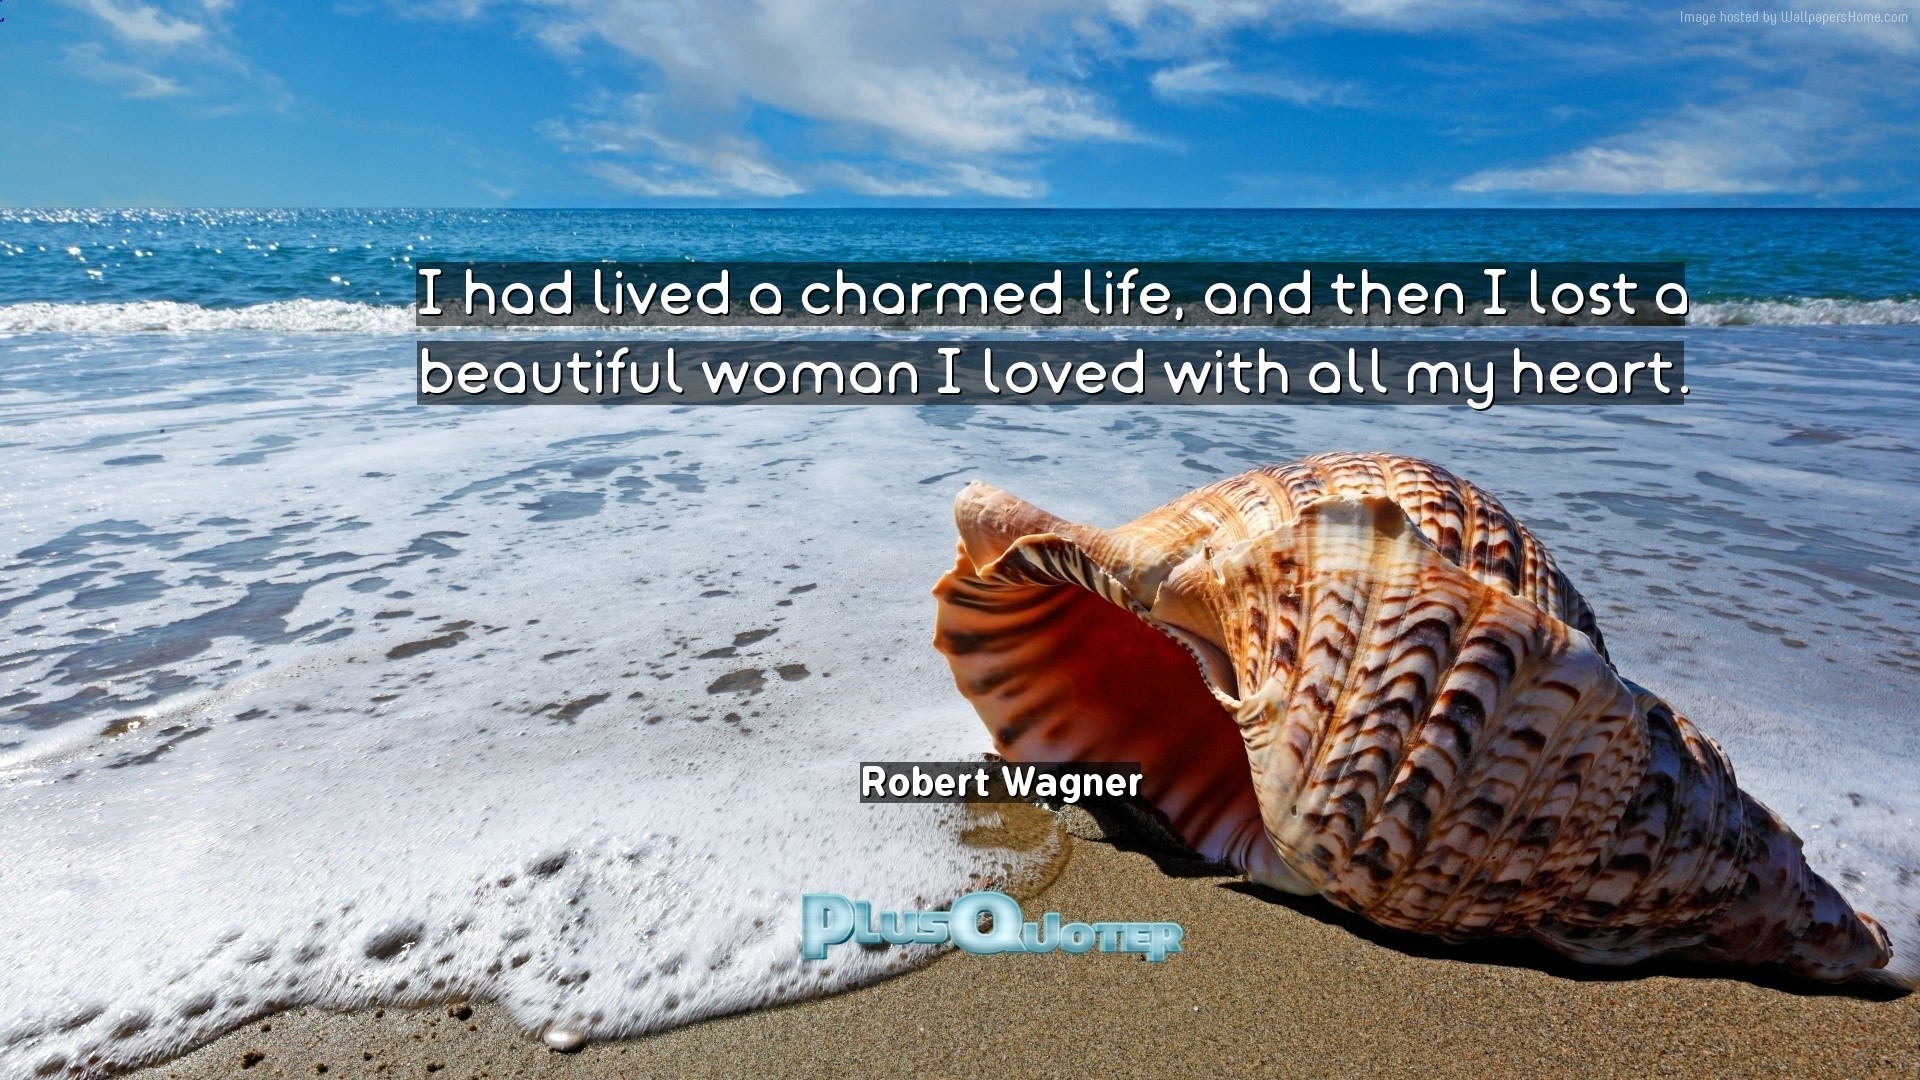 1920x1080 Download Wallpaper with inspirational Quotes- "I had lived a charmed life,  and then